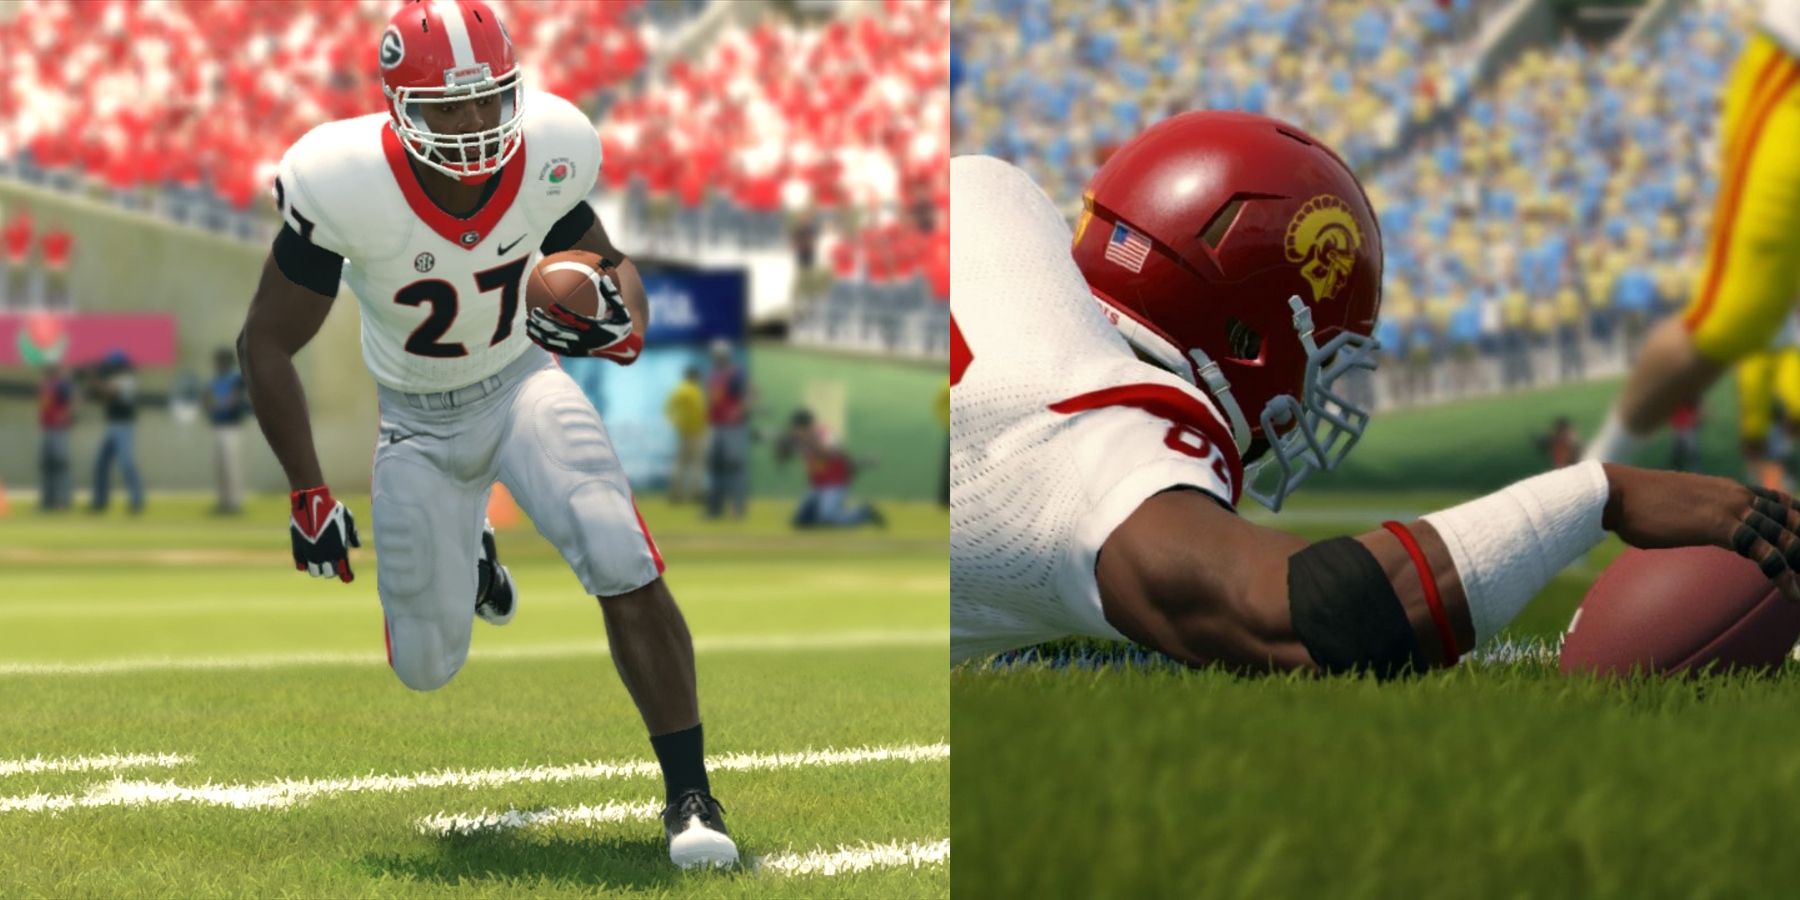 ea upcoming football game could be releasing on mobile as well as console